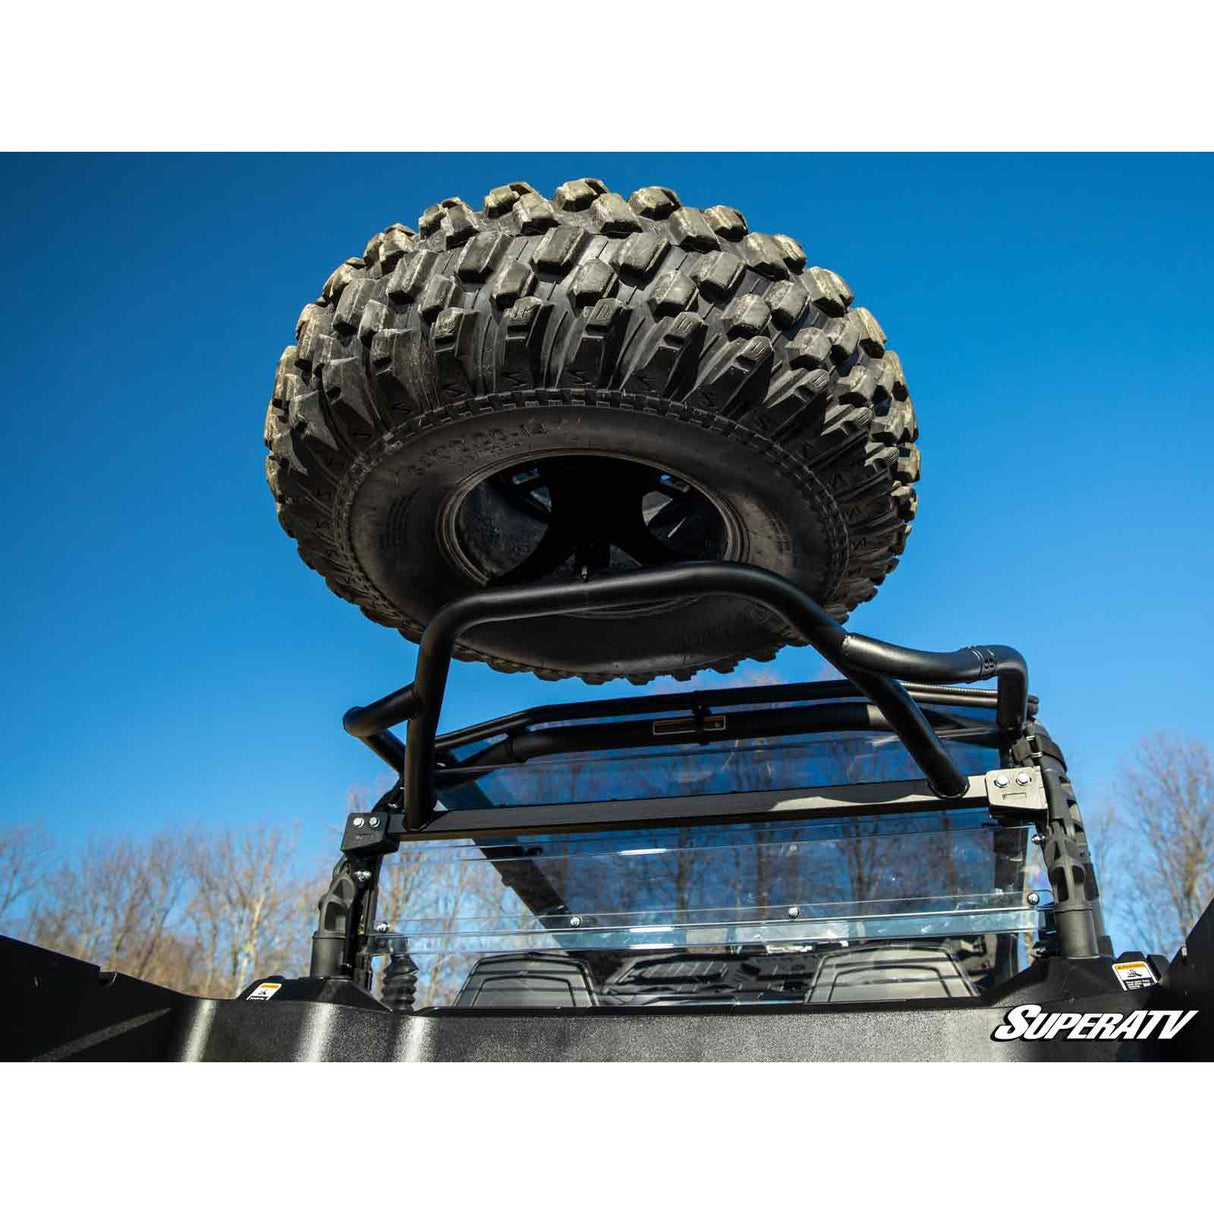 2021-2024 Can-am Commander spare tire carrier